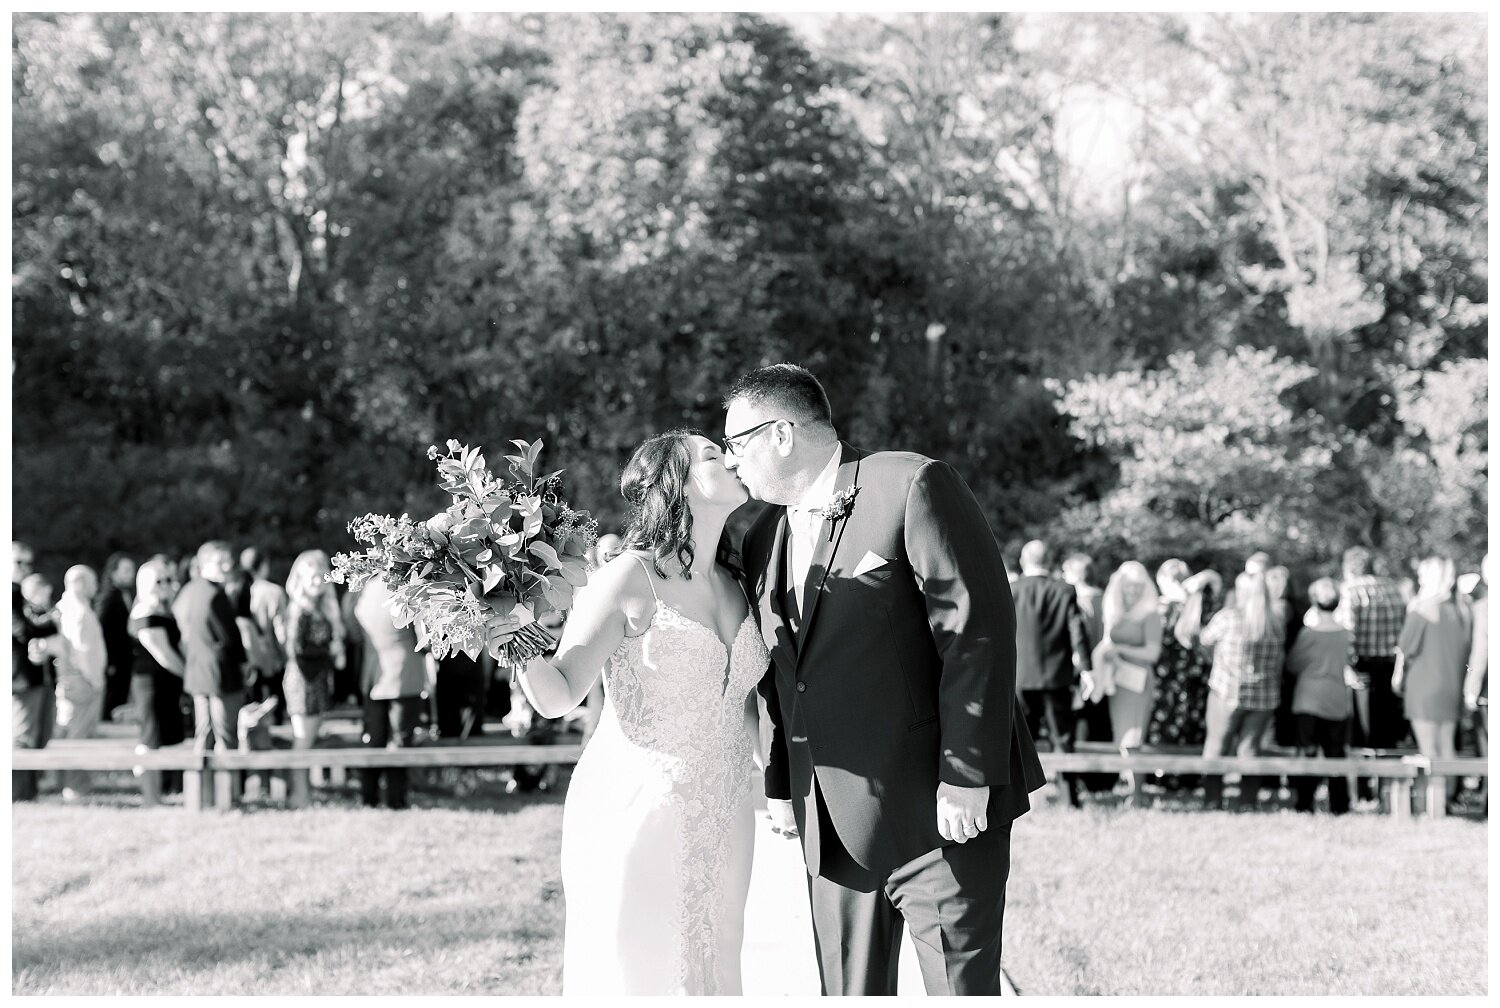 Outdoor ceremony at The Farms of Woodend Springs